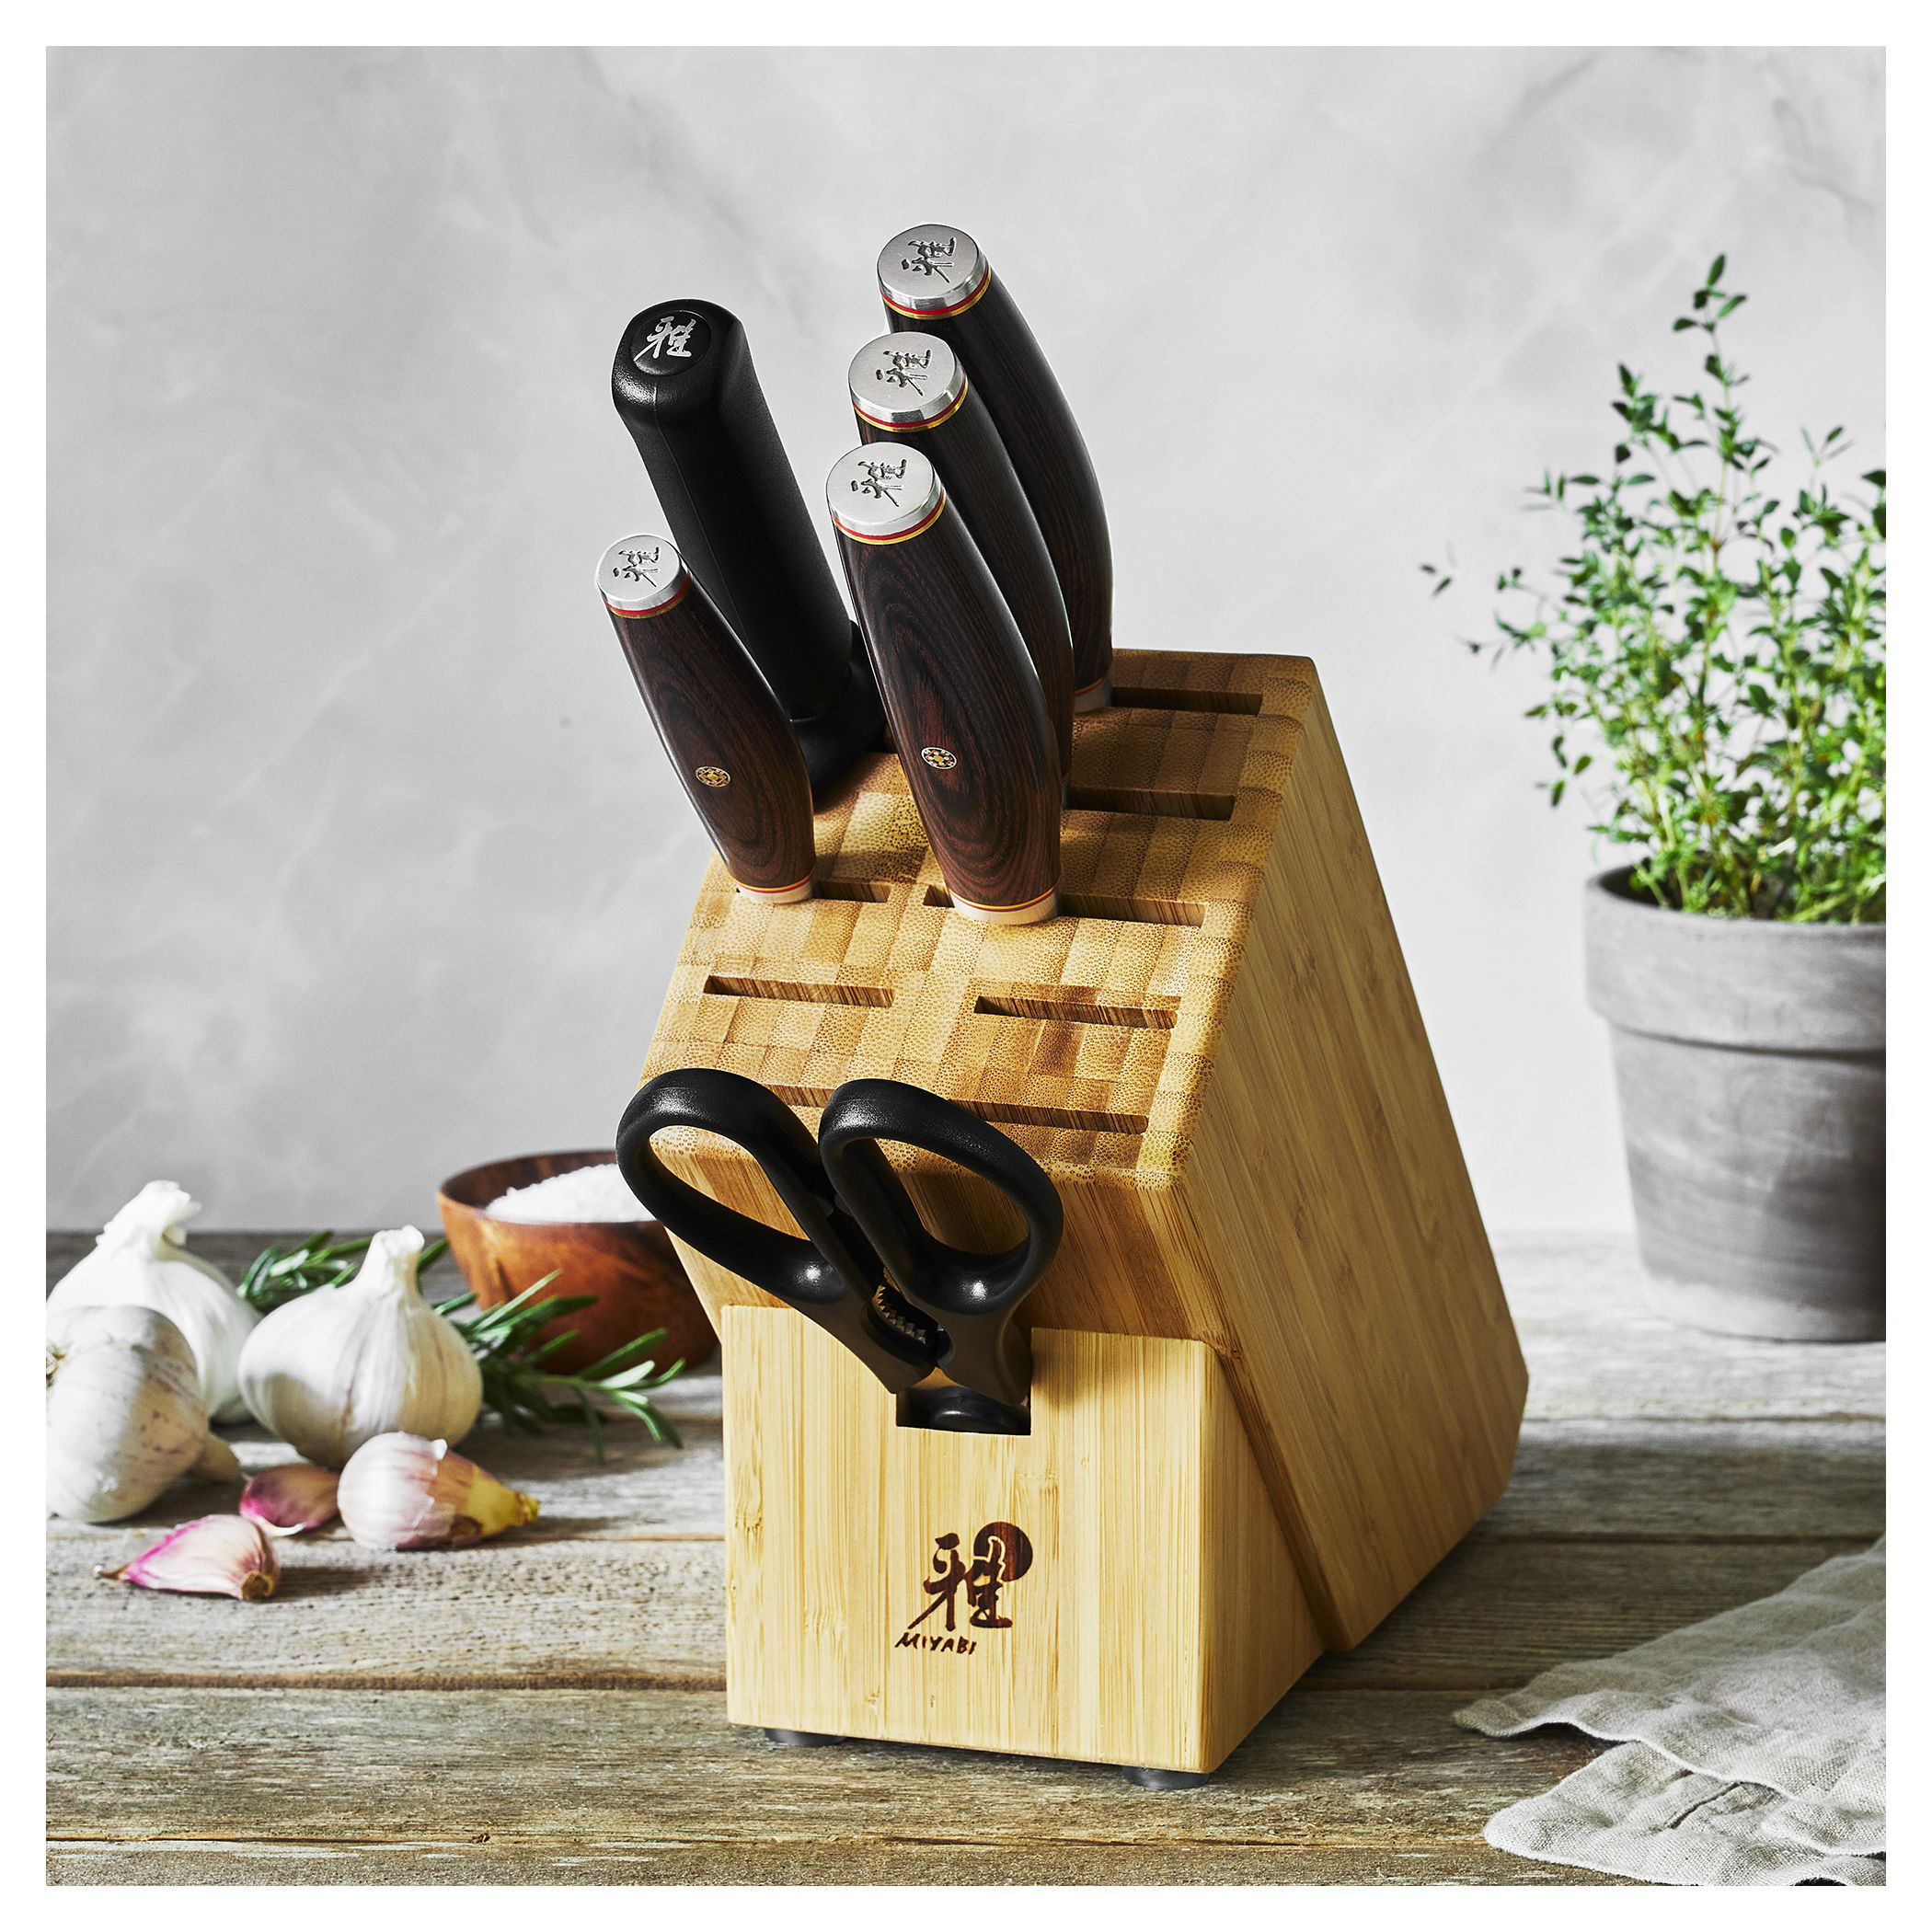  Knife Set, Kitchen Non Stick Knives Set with Block Thick Blade  Cutlery Knife Block Sets with Sharpener 6pcs Steak Knife Shears Chef Sharp  Quality Aluminum Alloy Block Blue Handle and Blade